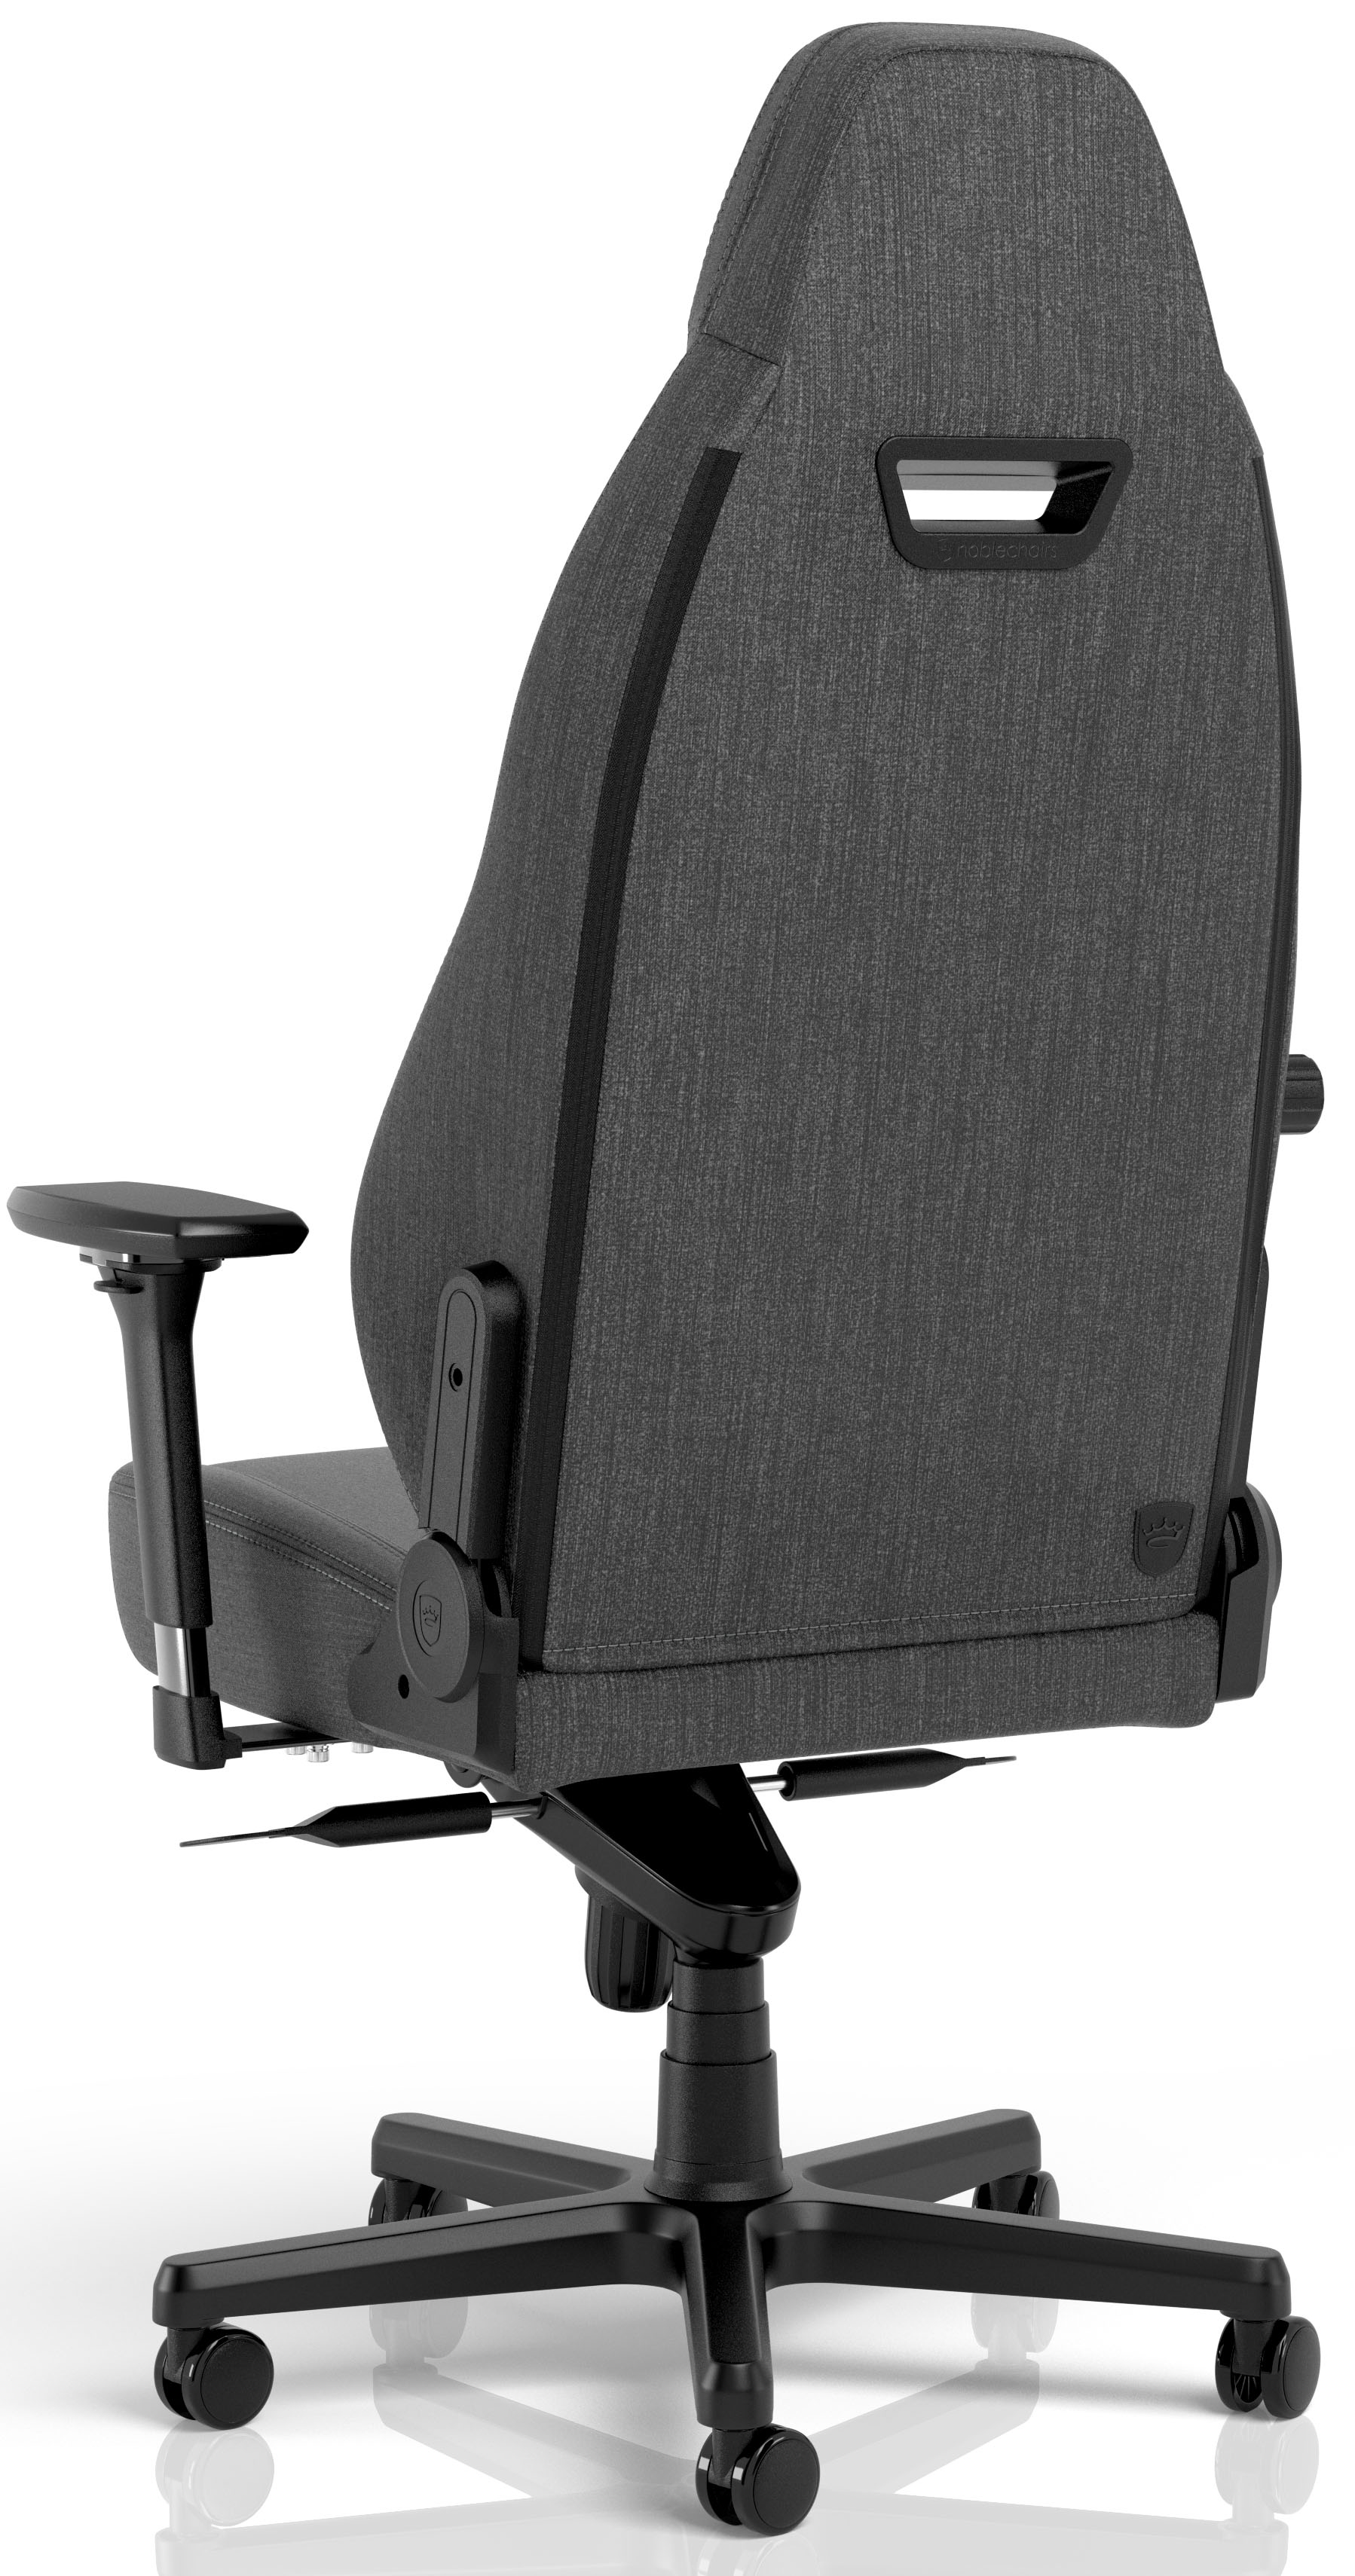 noblechairs - ** B Grade ** Silla noblechairs LEGEND TX - Fabric Edition Anthracite